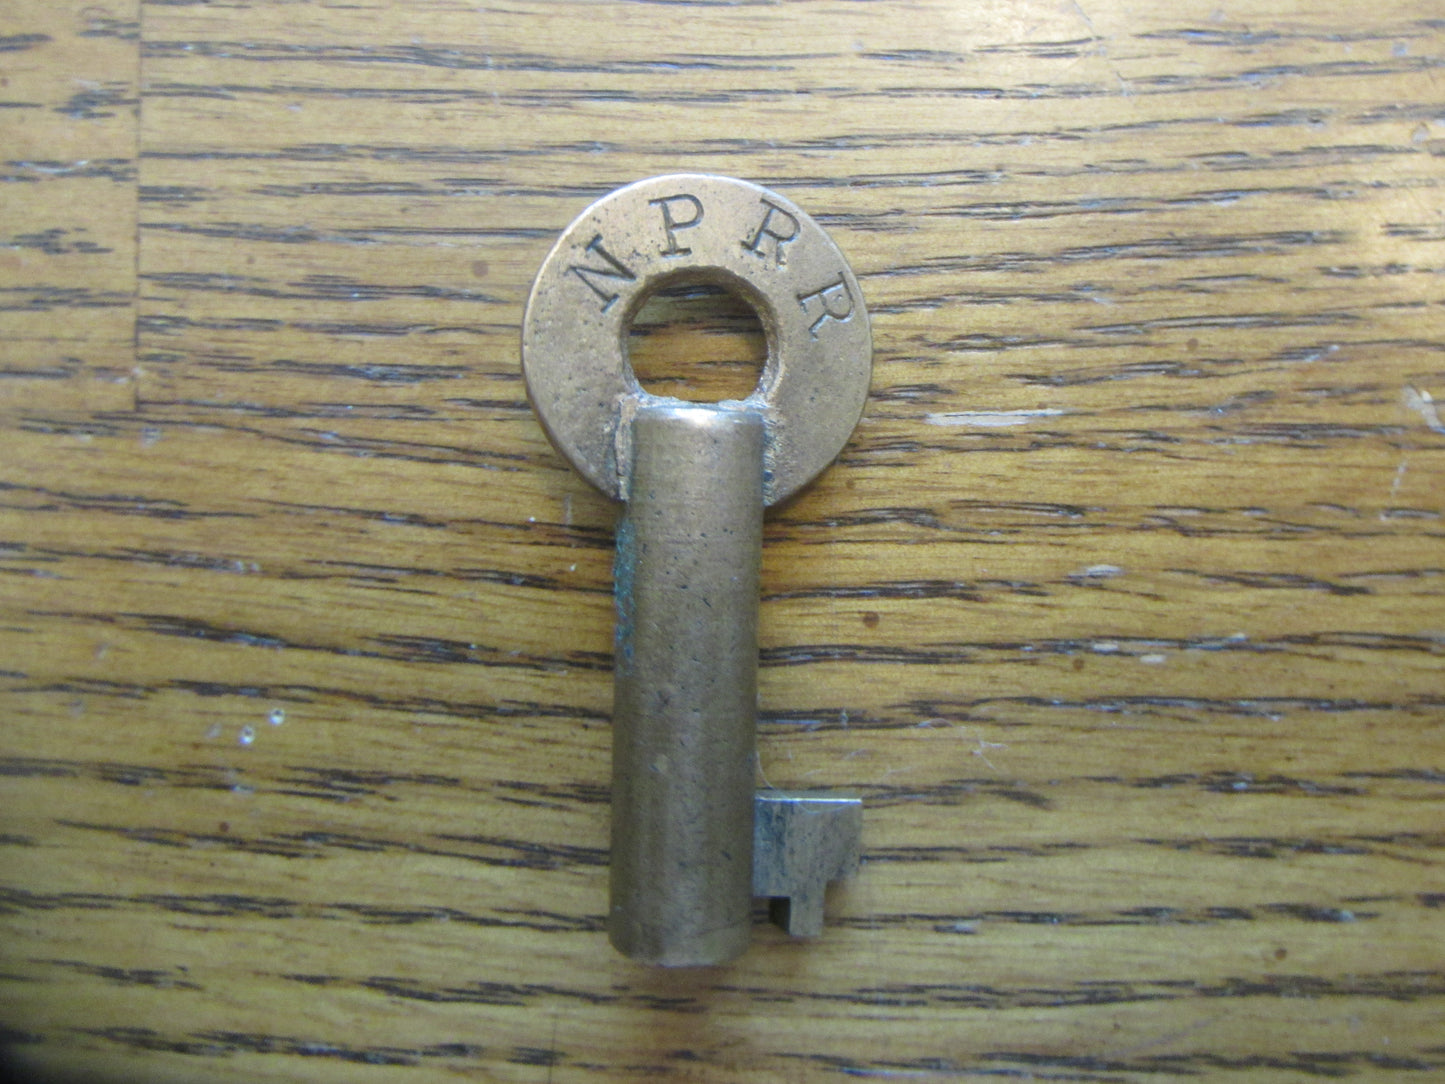 Northern Pacific RR Key